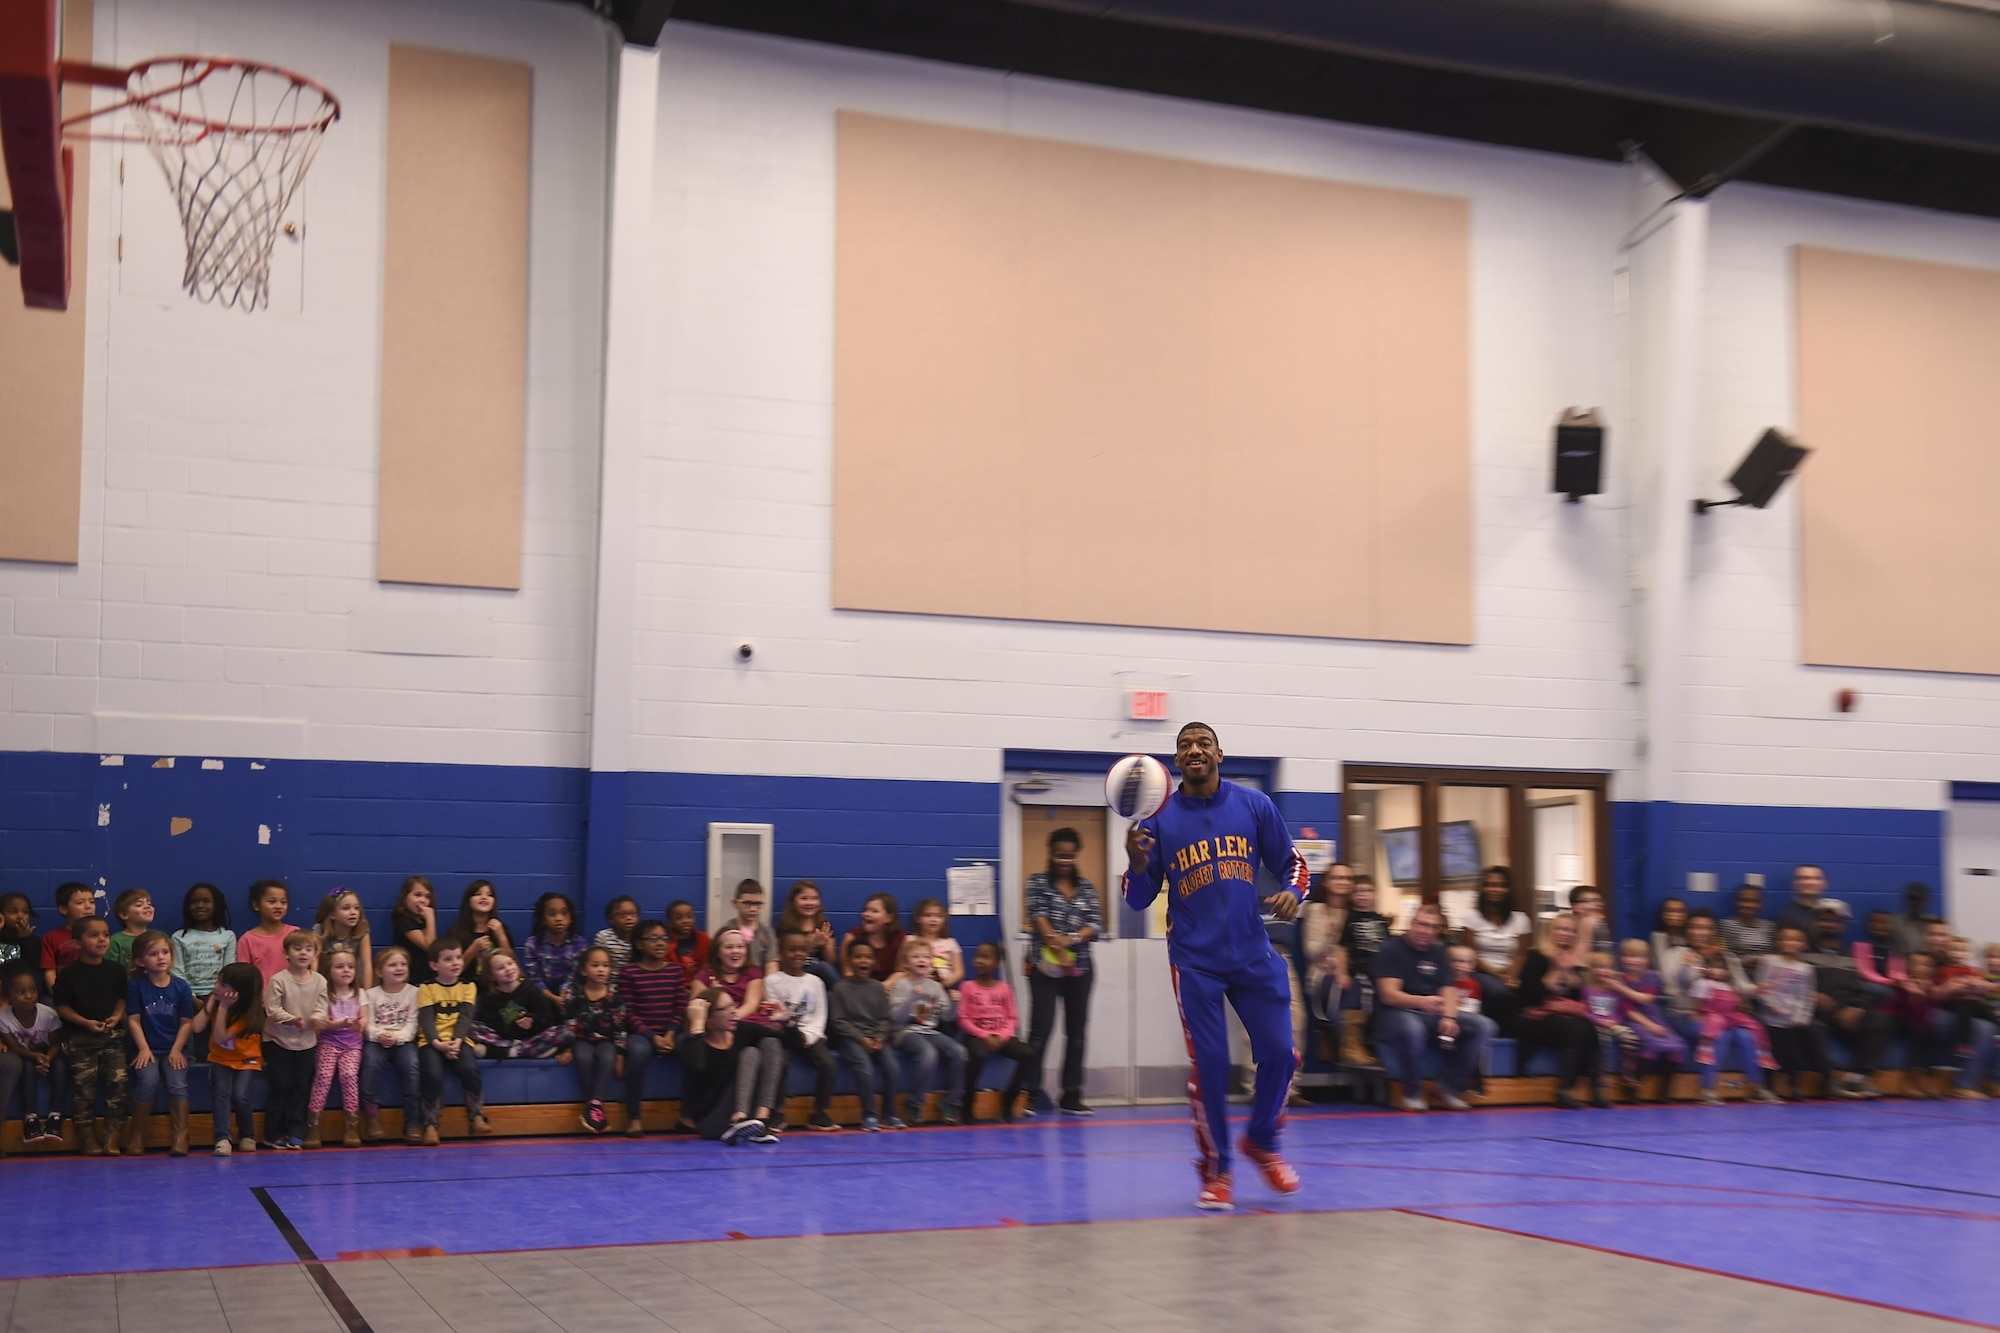 Anthony “Buckets” Blakes, a Harlem Globetrotters point guard, showcases a basketball trick to a group of military families, Jan. 20, 2017, at the Little Rock Air Force Base Youth Center, Ark. Buckets routinely works with and mentors children, as a Harlem Globetrotter Ambassador of Goodwill. (U.S. Air Force photo by Senior Airman Harry Brexel)